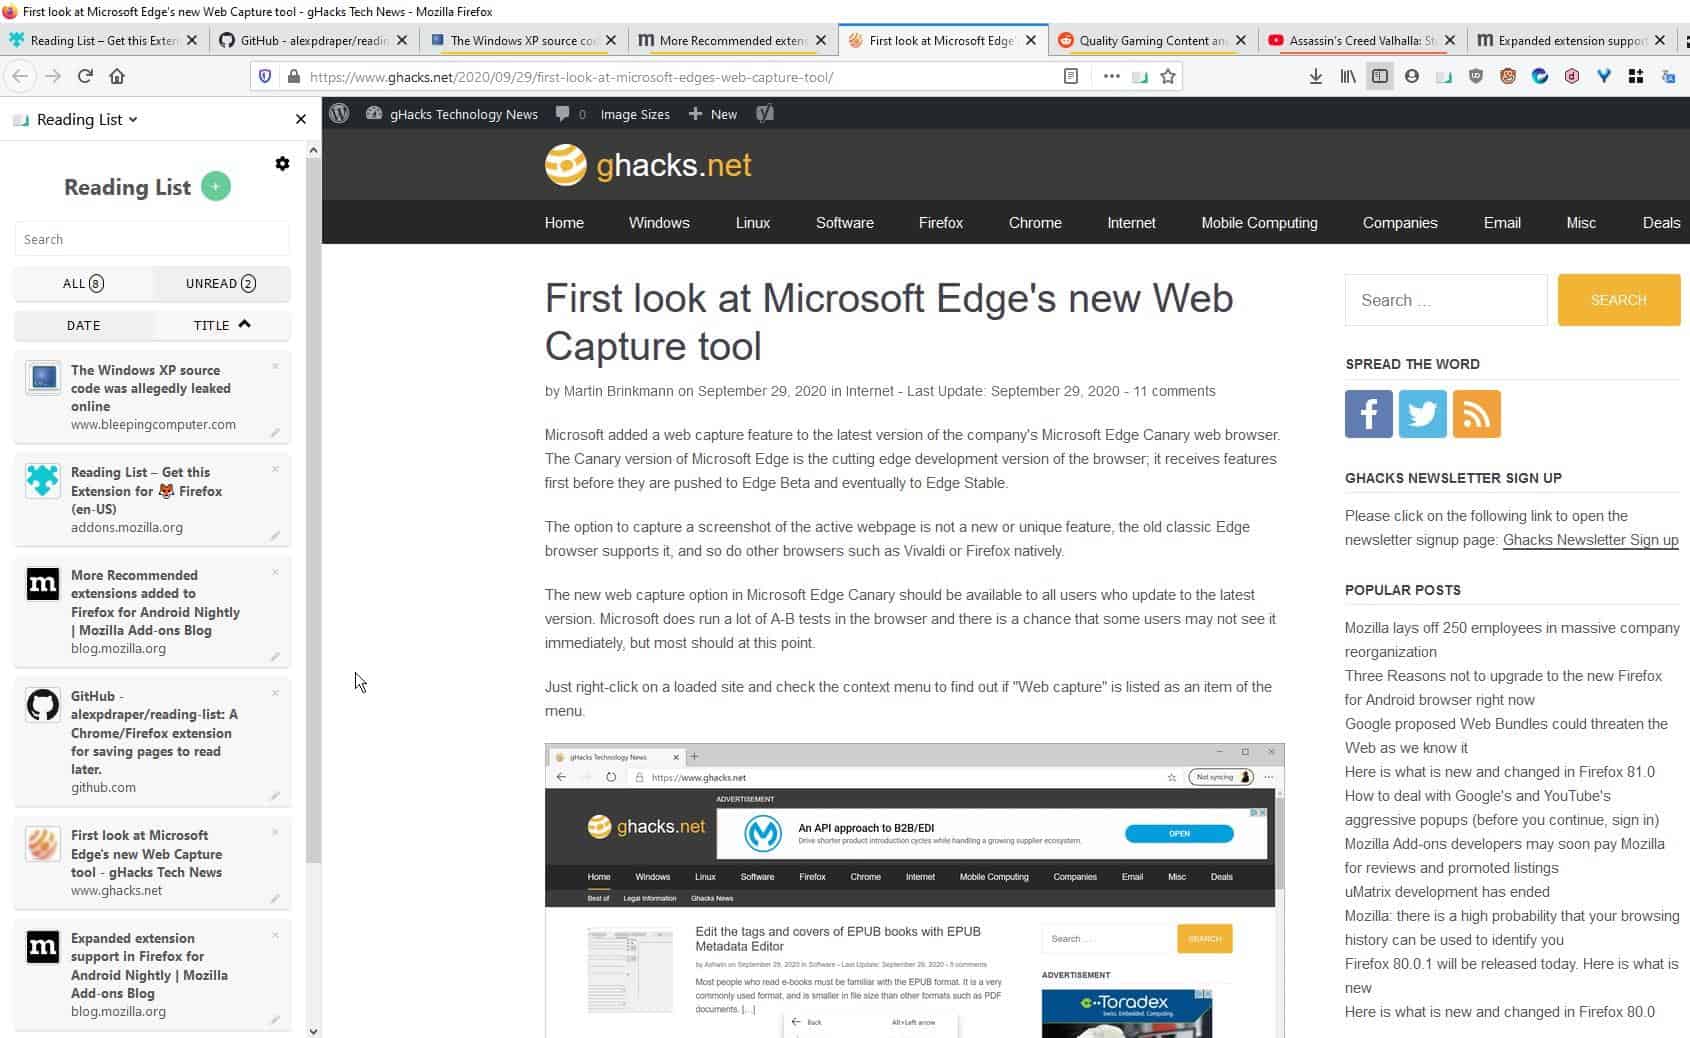 Save your tabs for later with the Reading List extension for Firefox